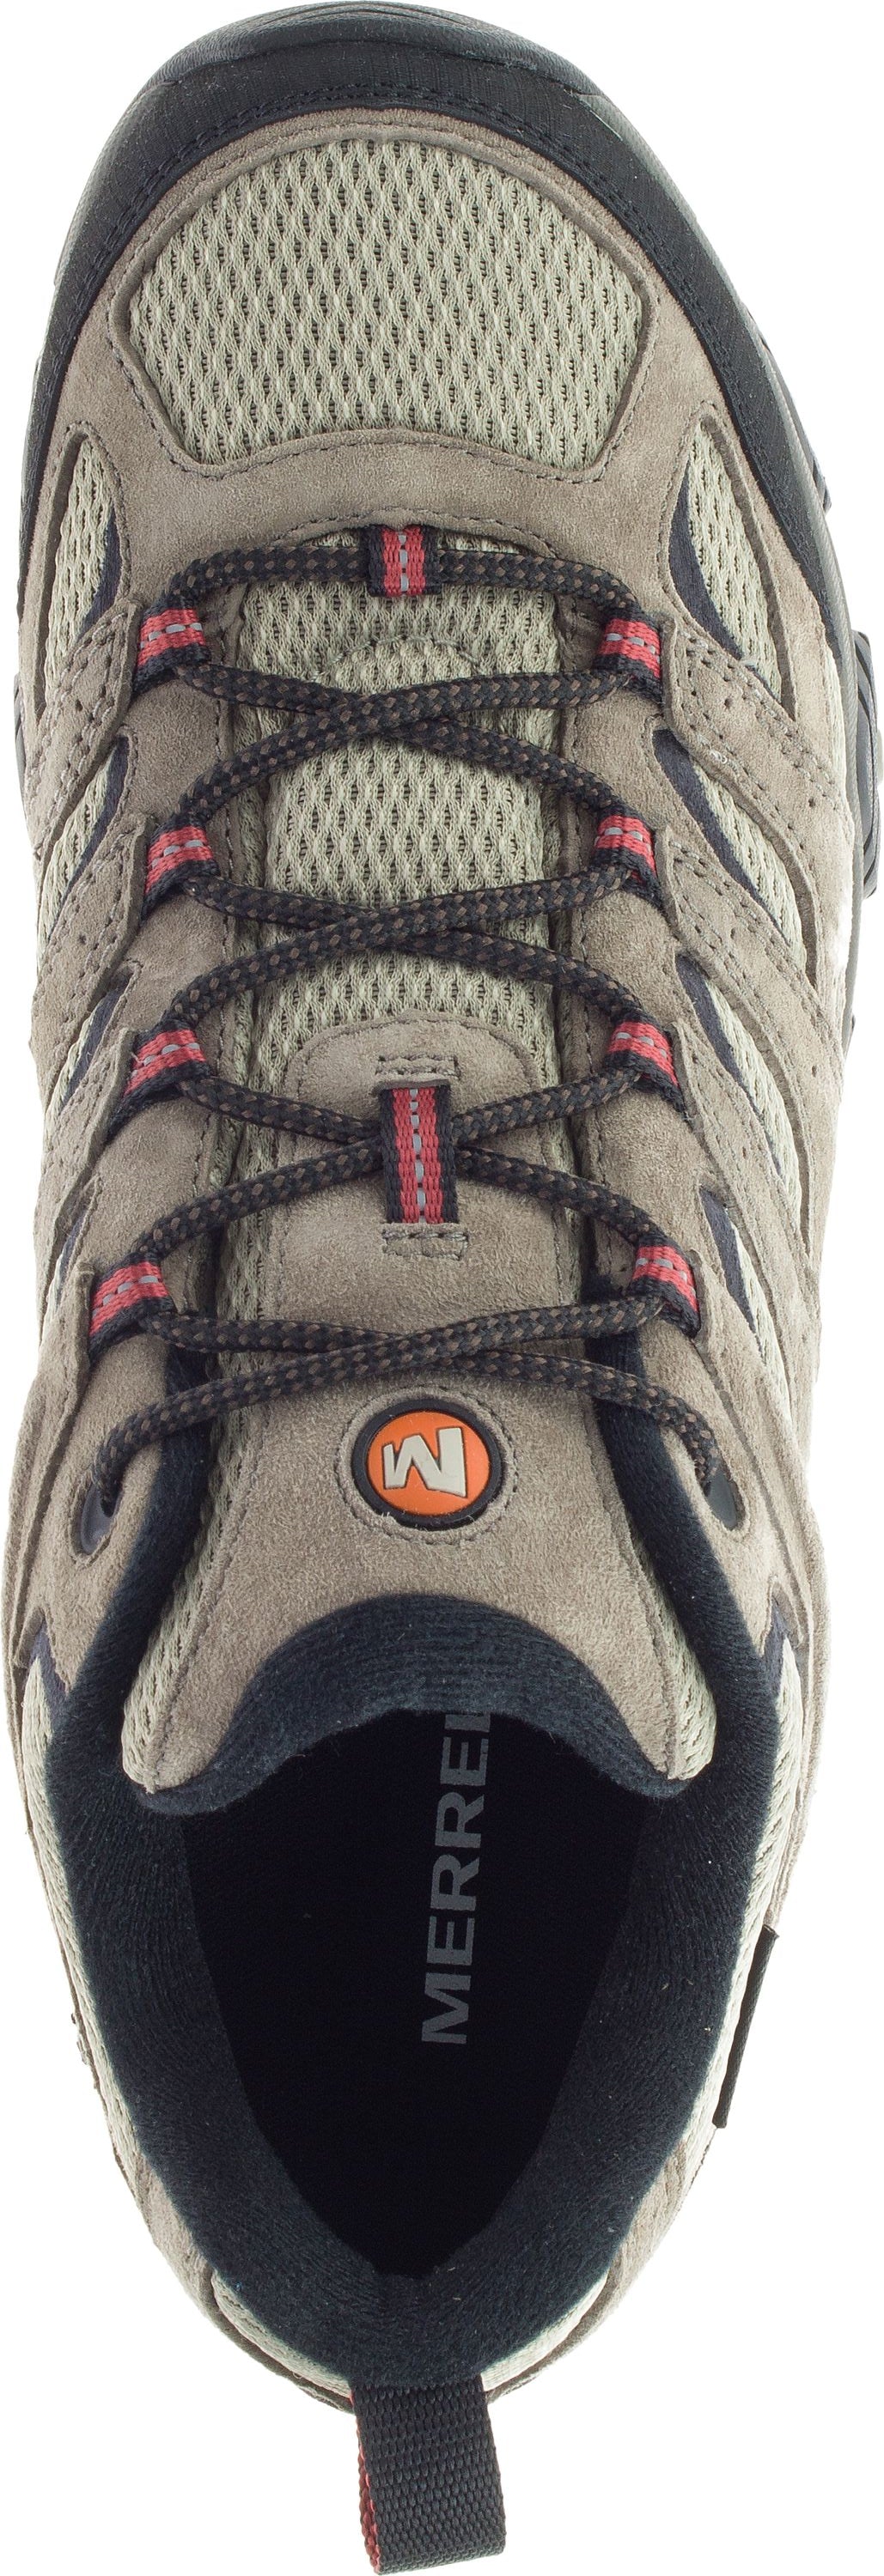 Merrell Shoes  Waterproof Merrell Shoes, Hiking Boots & Sandals